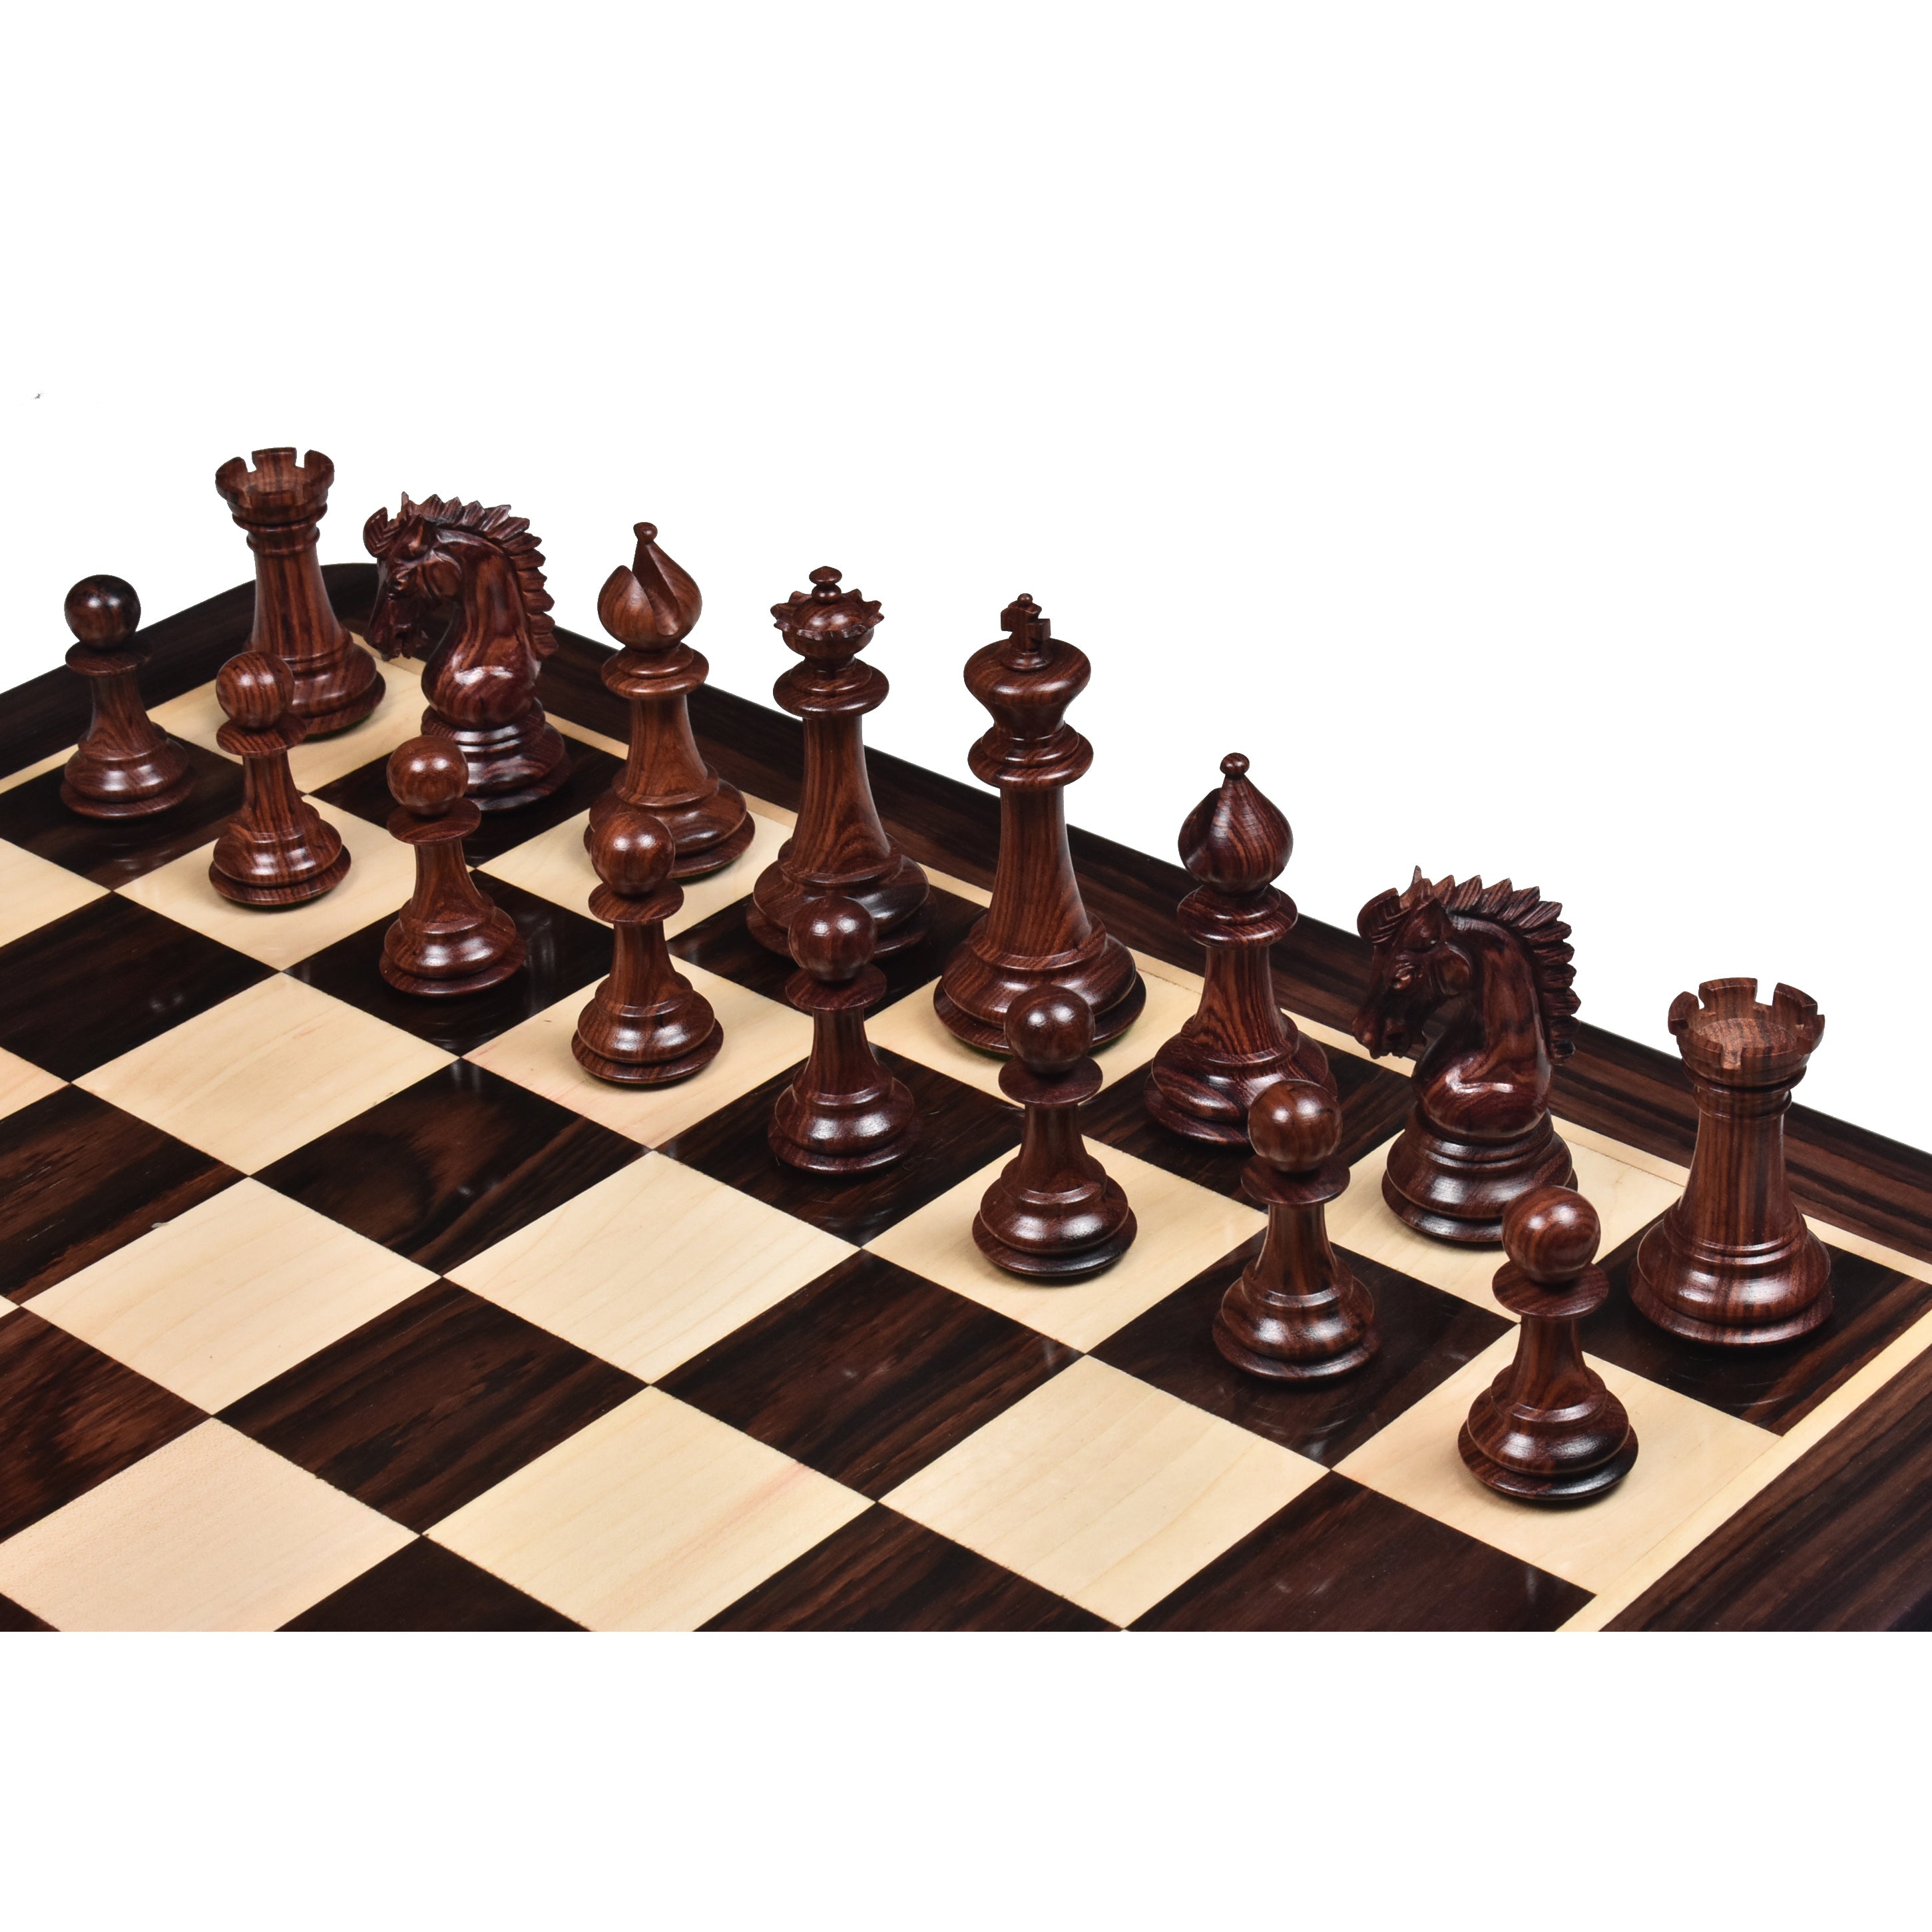 3.7" Emperor Series Staunton Chess Pieces Only set- Double Weighted Rose Wood